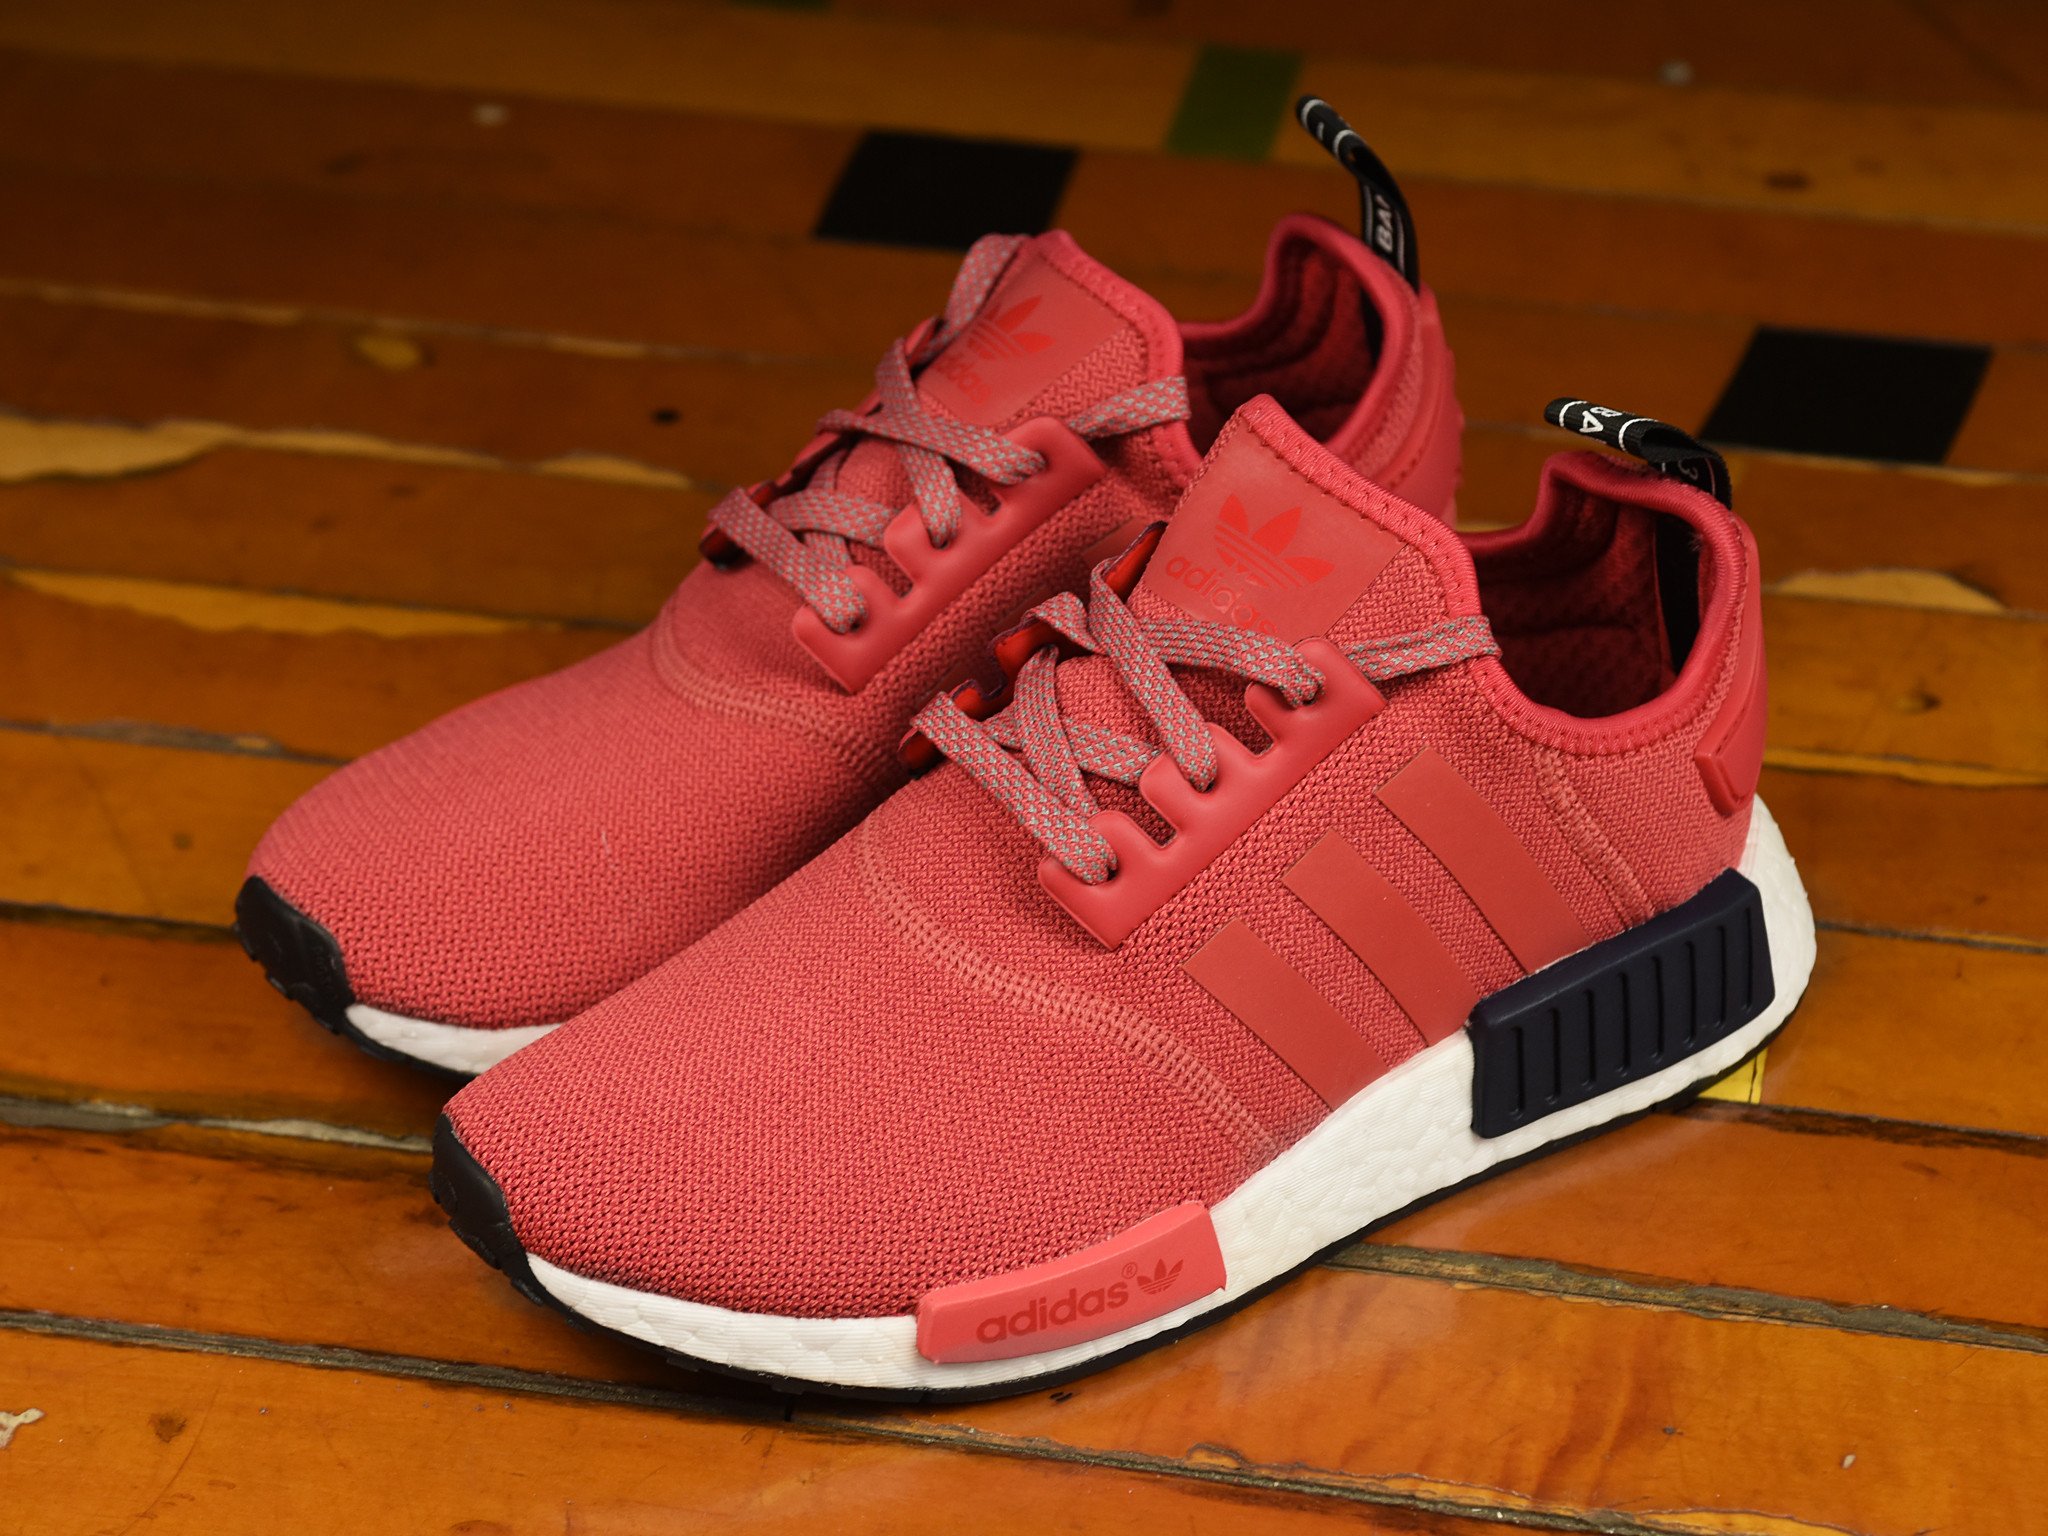 nmd r1 womens red